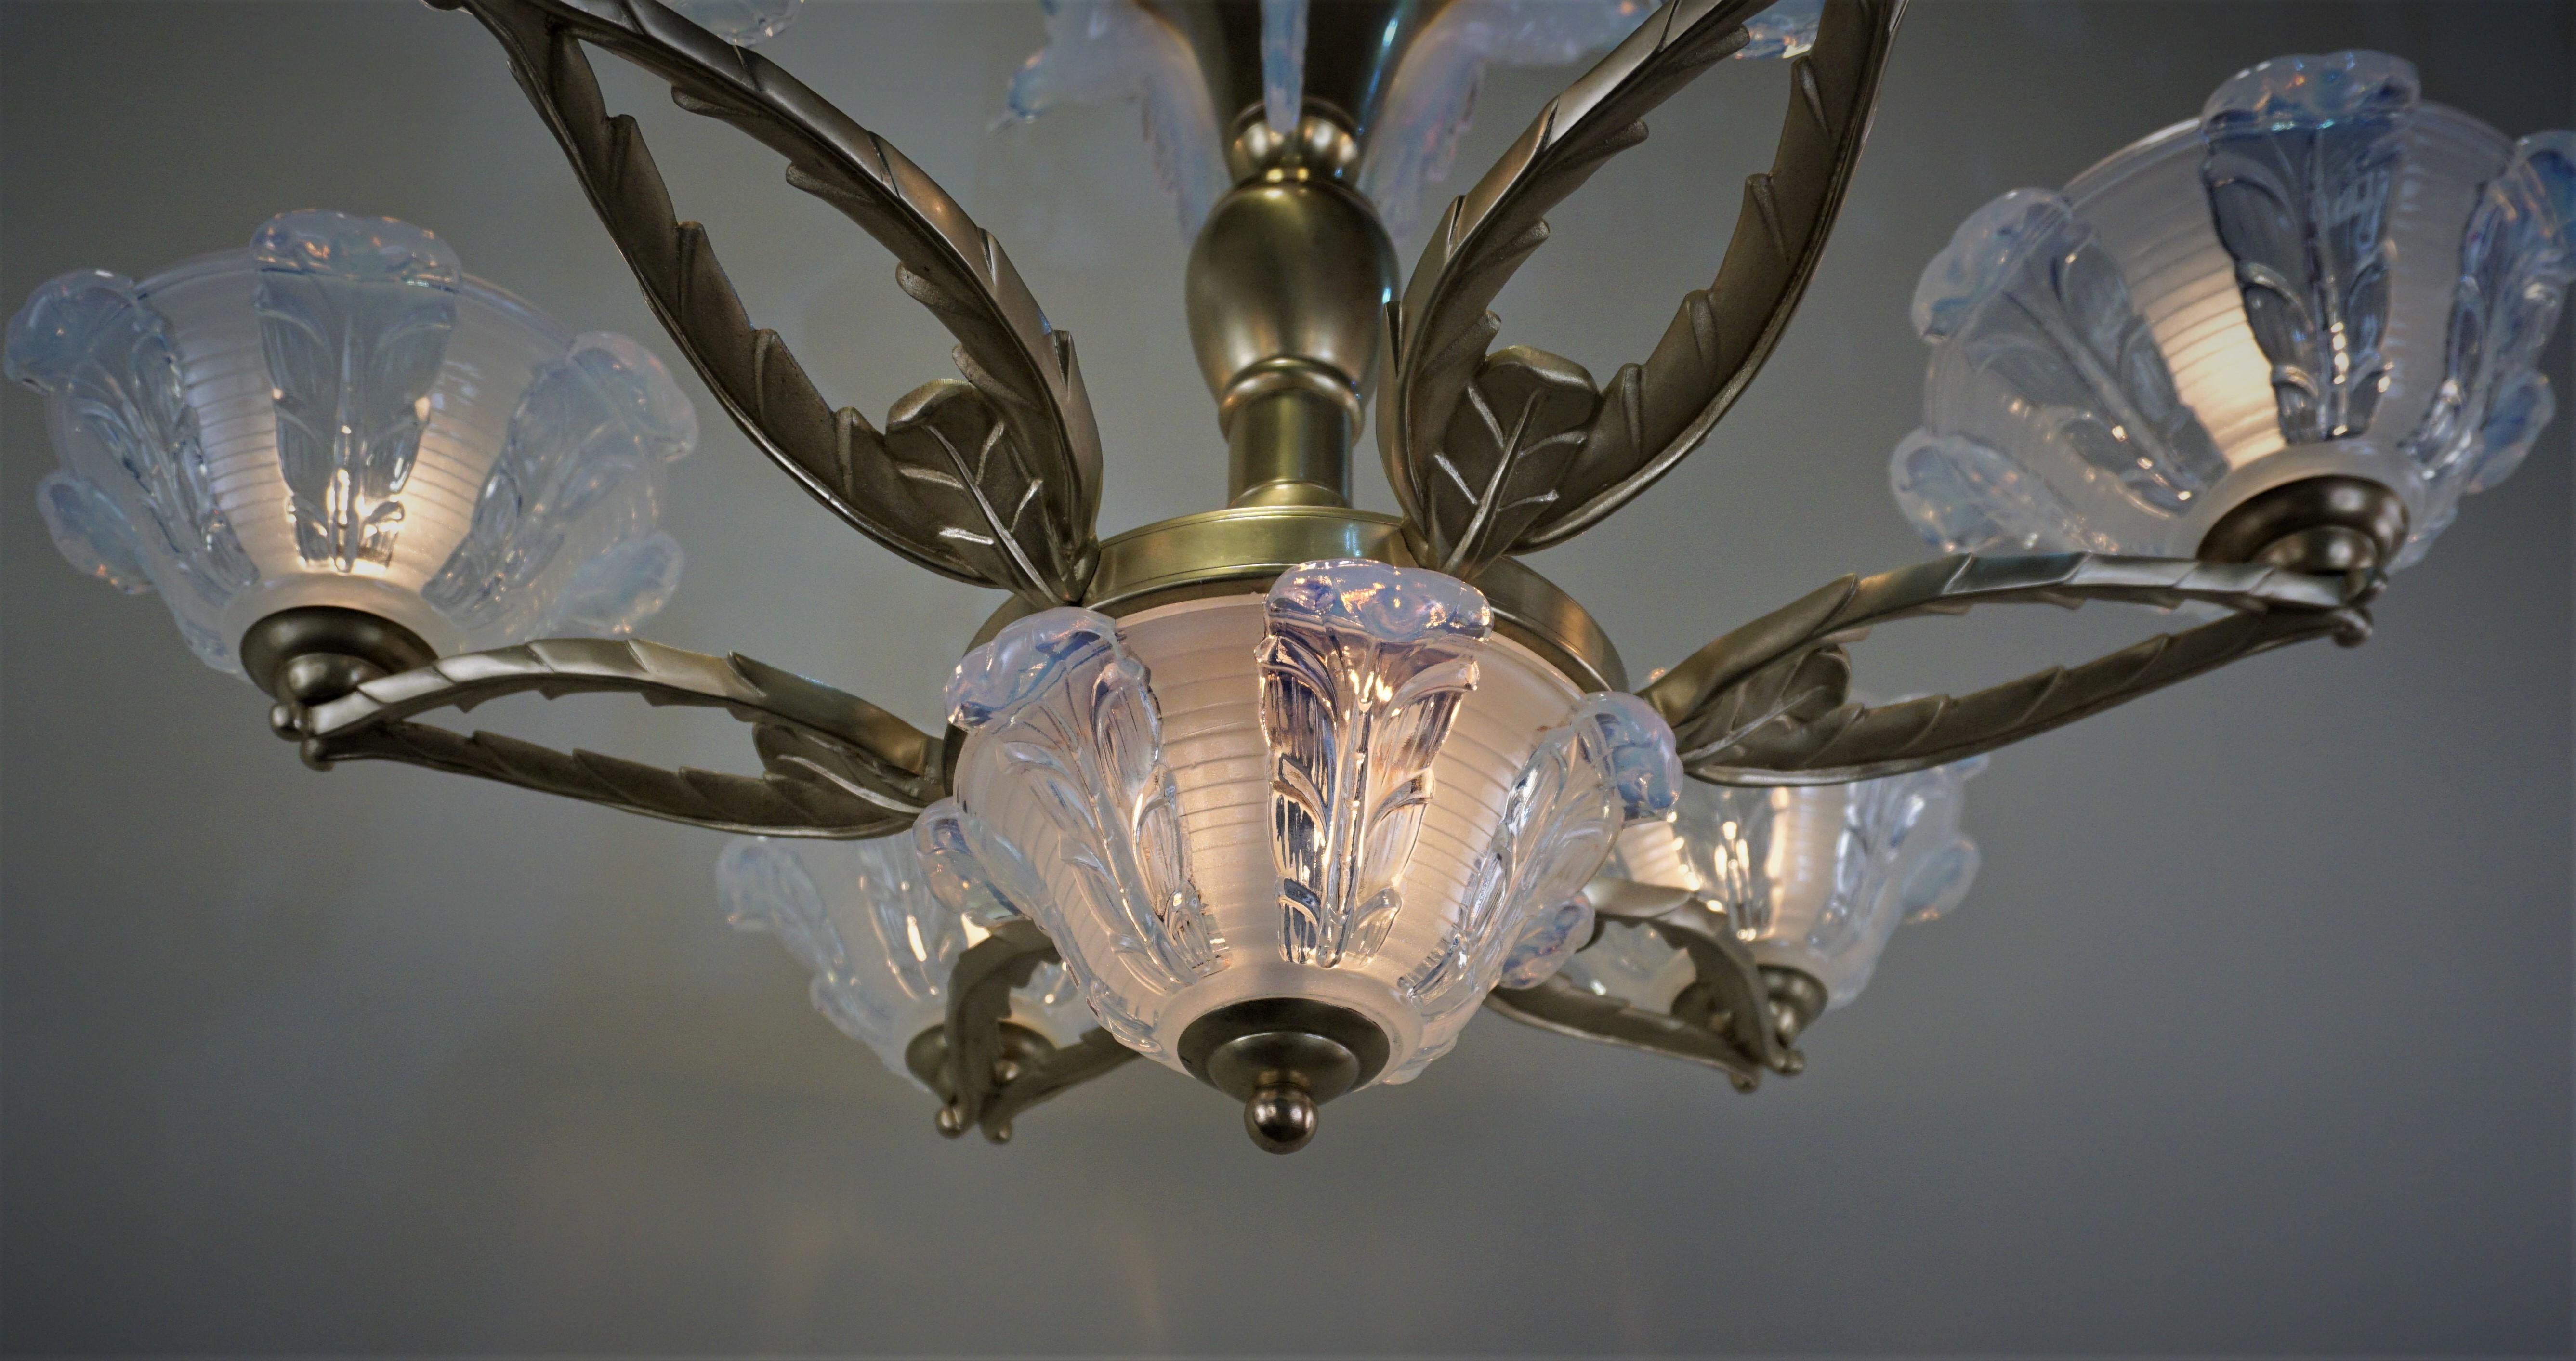 French Art Deco Chandelier with Opalescent Glass Shades by Ezan & Petitot 1